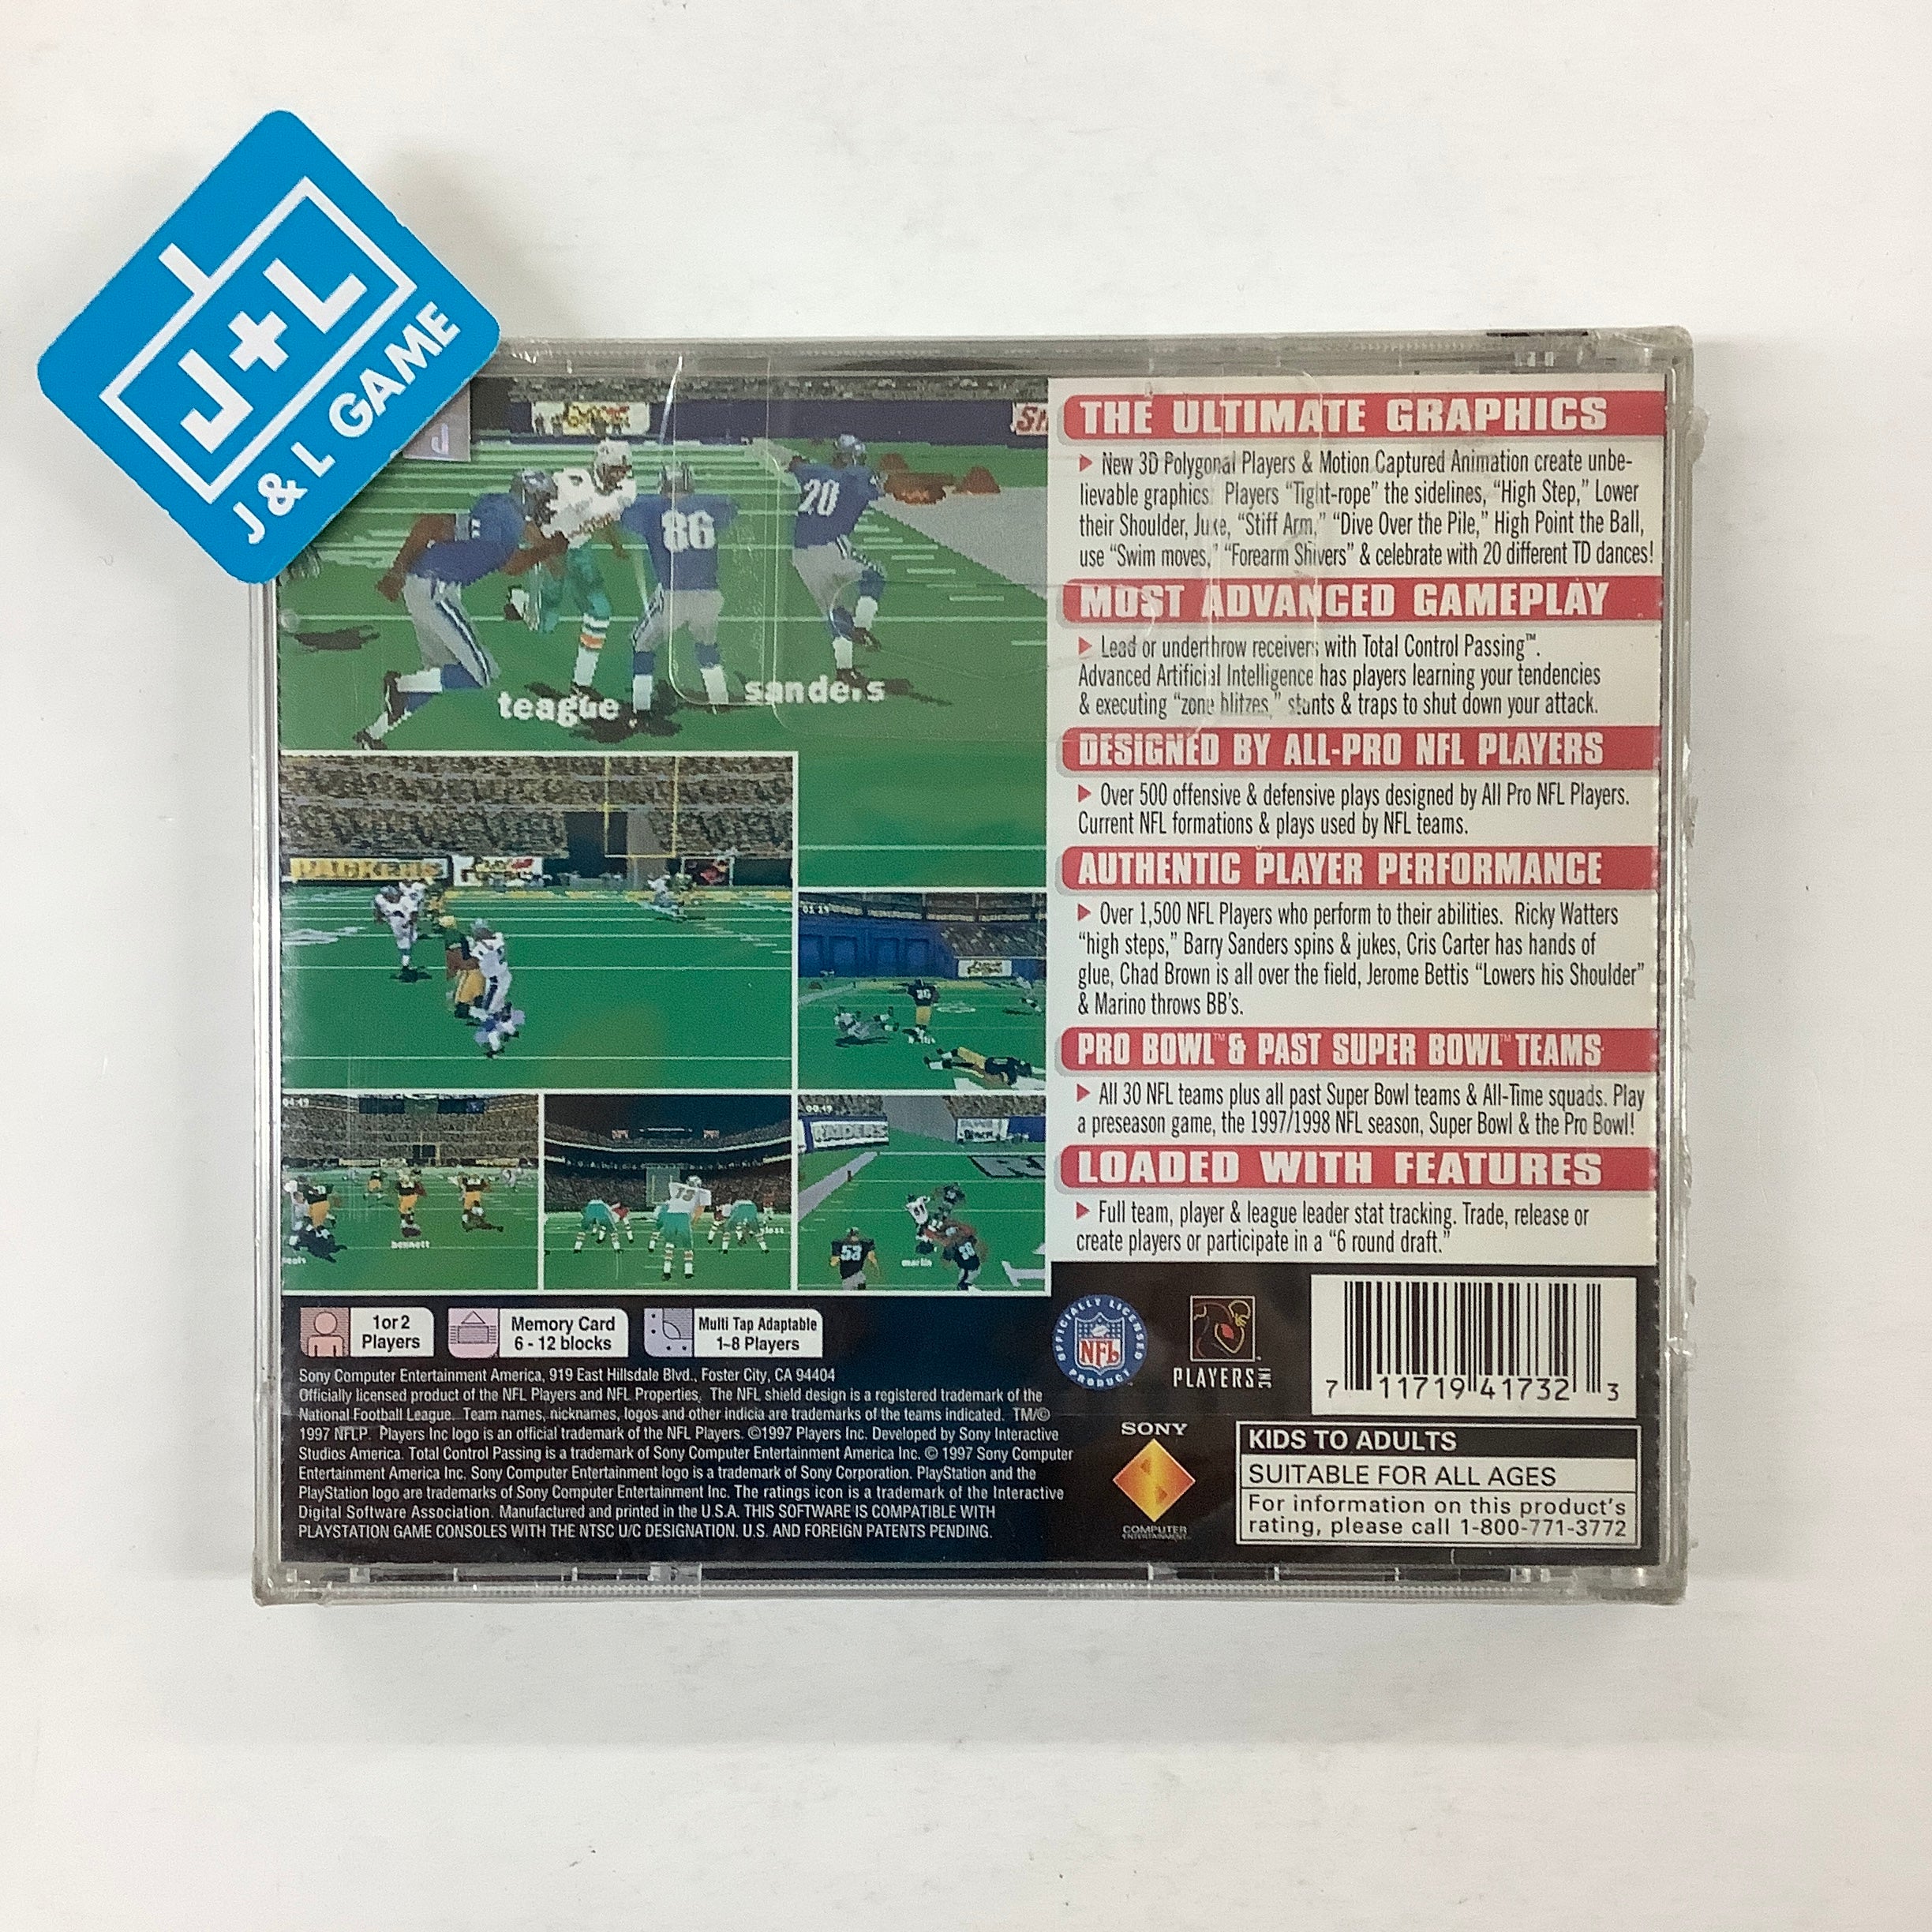 NFL GameDay 98 - (PS1) PlayStation 1 Video Games SCEA   